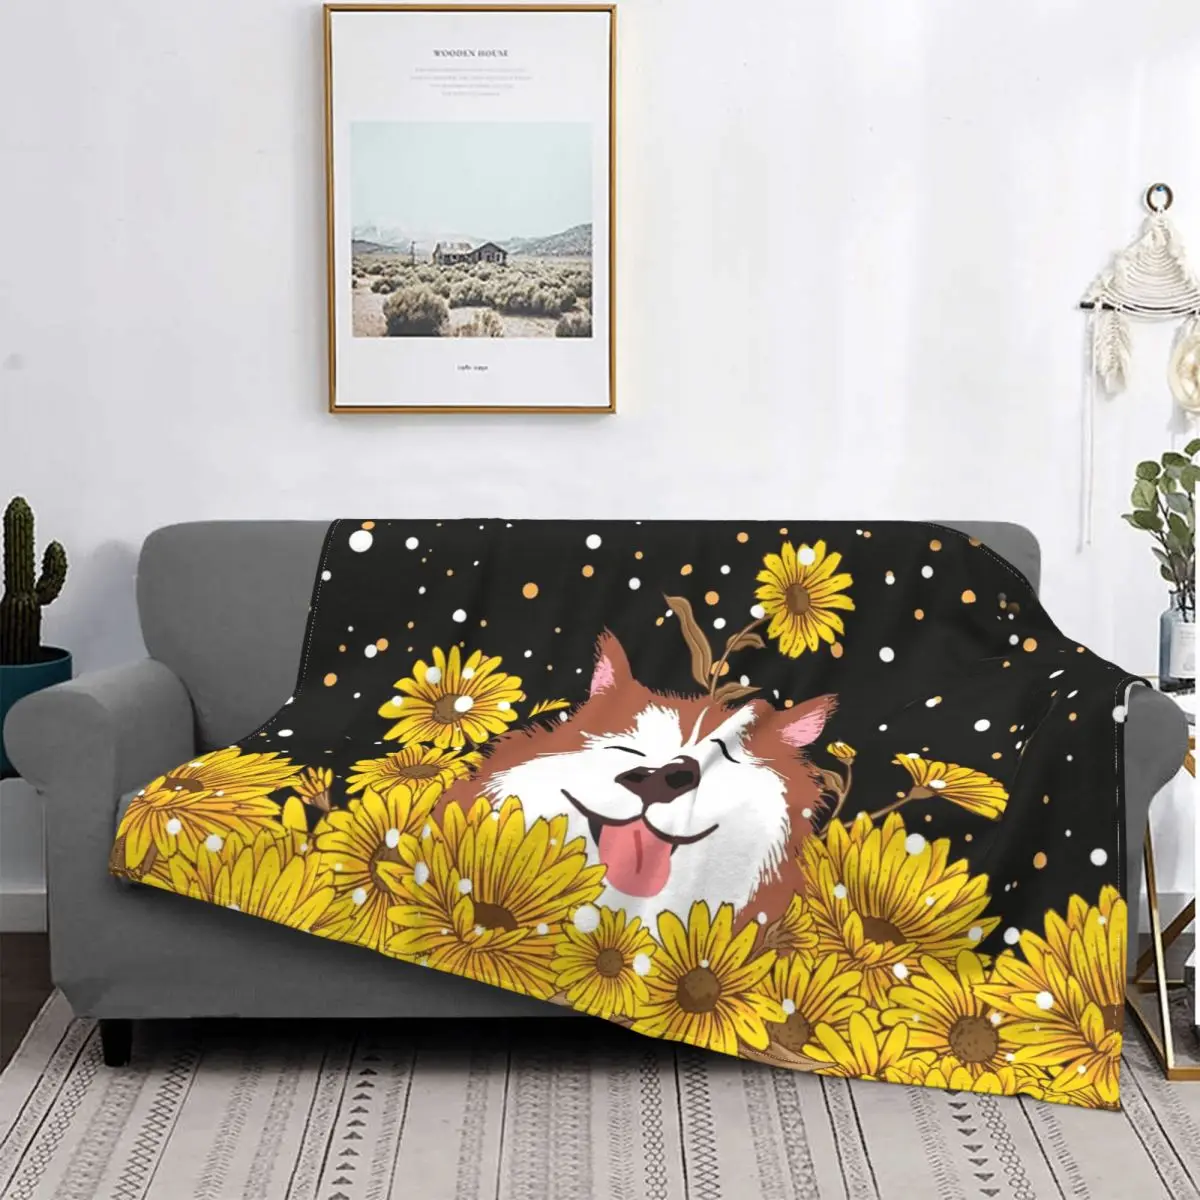 

Red Siberian Husky Dog And Sunflowers Blankets For Home Decor Super Soft Flannel Fleece Blankets and Throws Suprise Gifts